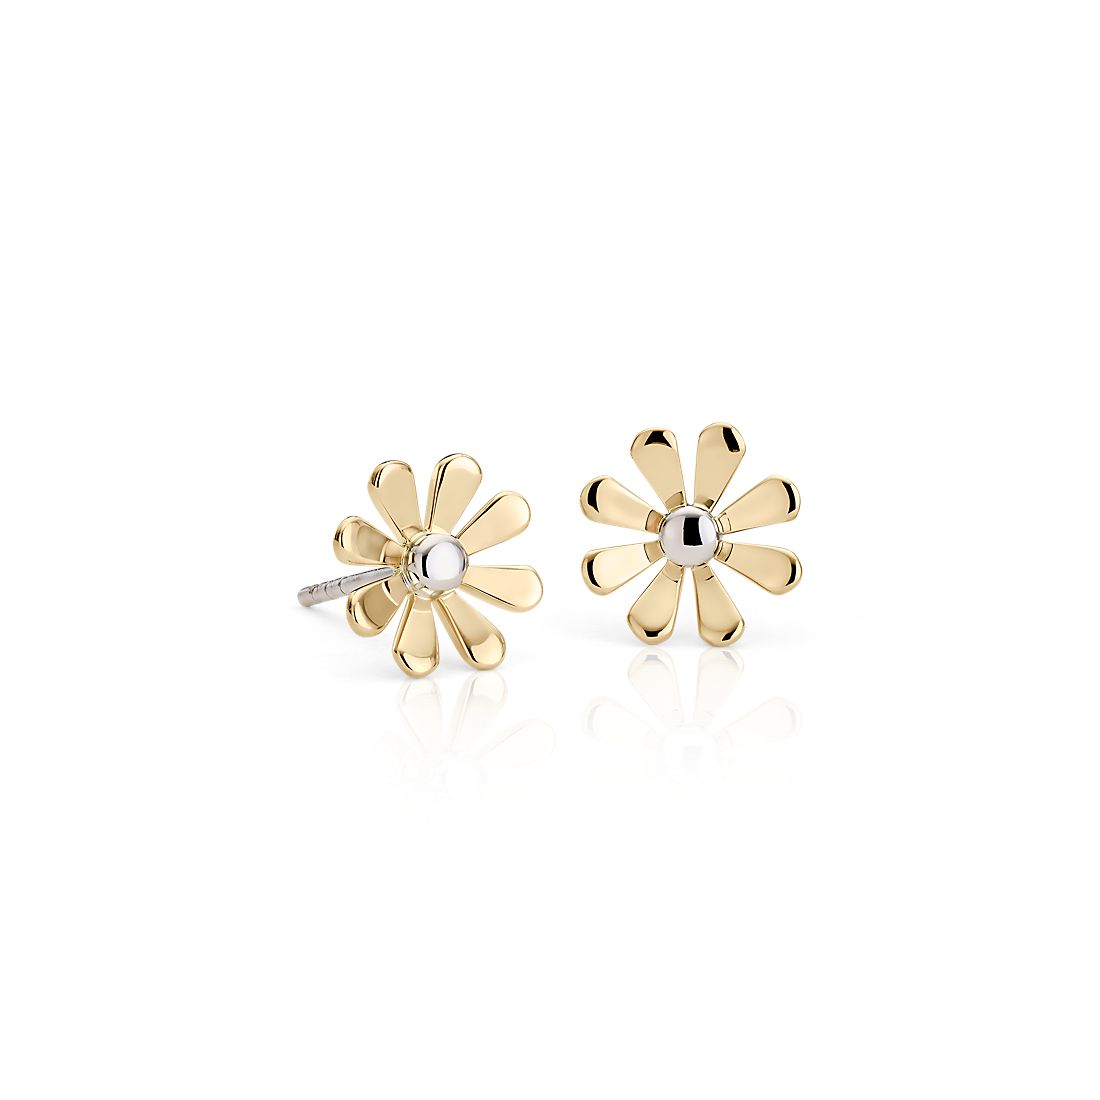 Daisy Stud Earrings in 14k Yellow and White Gold